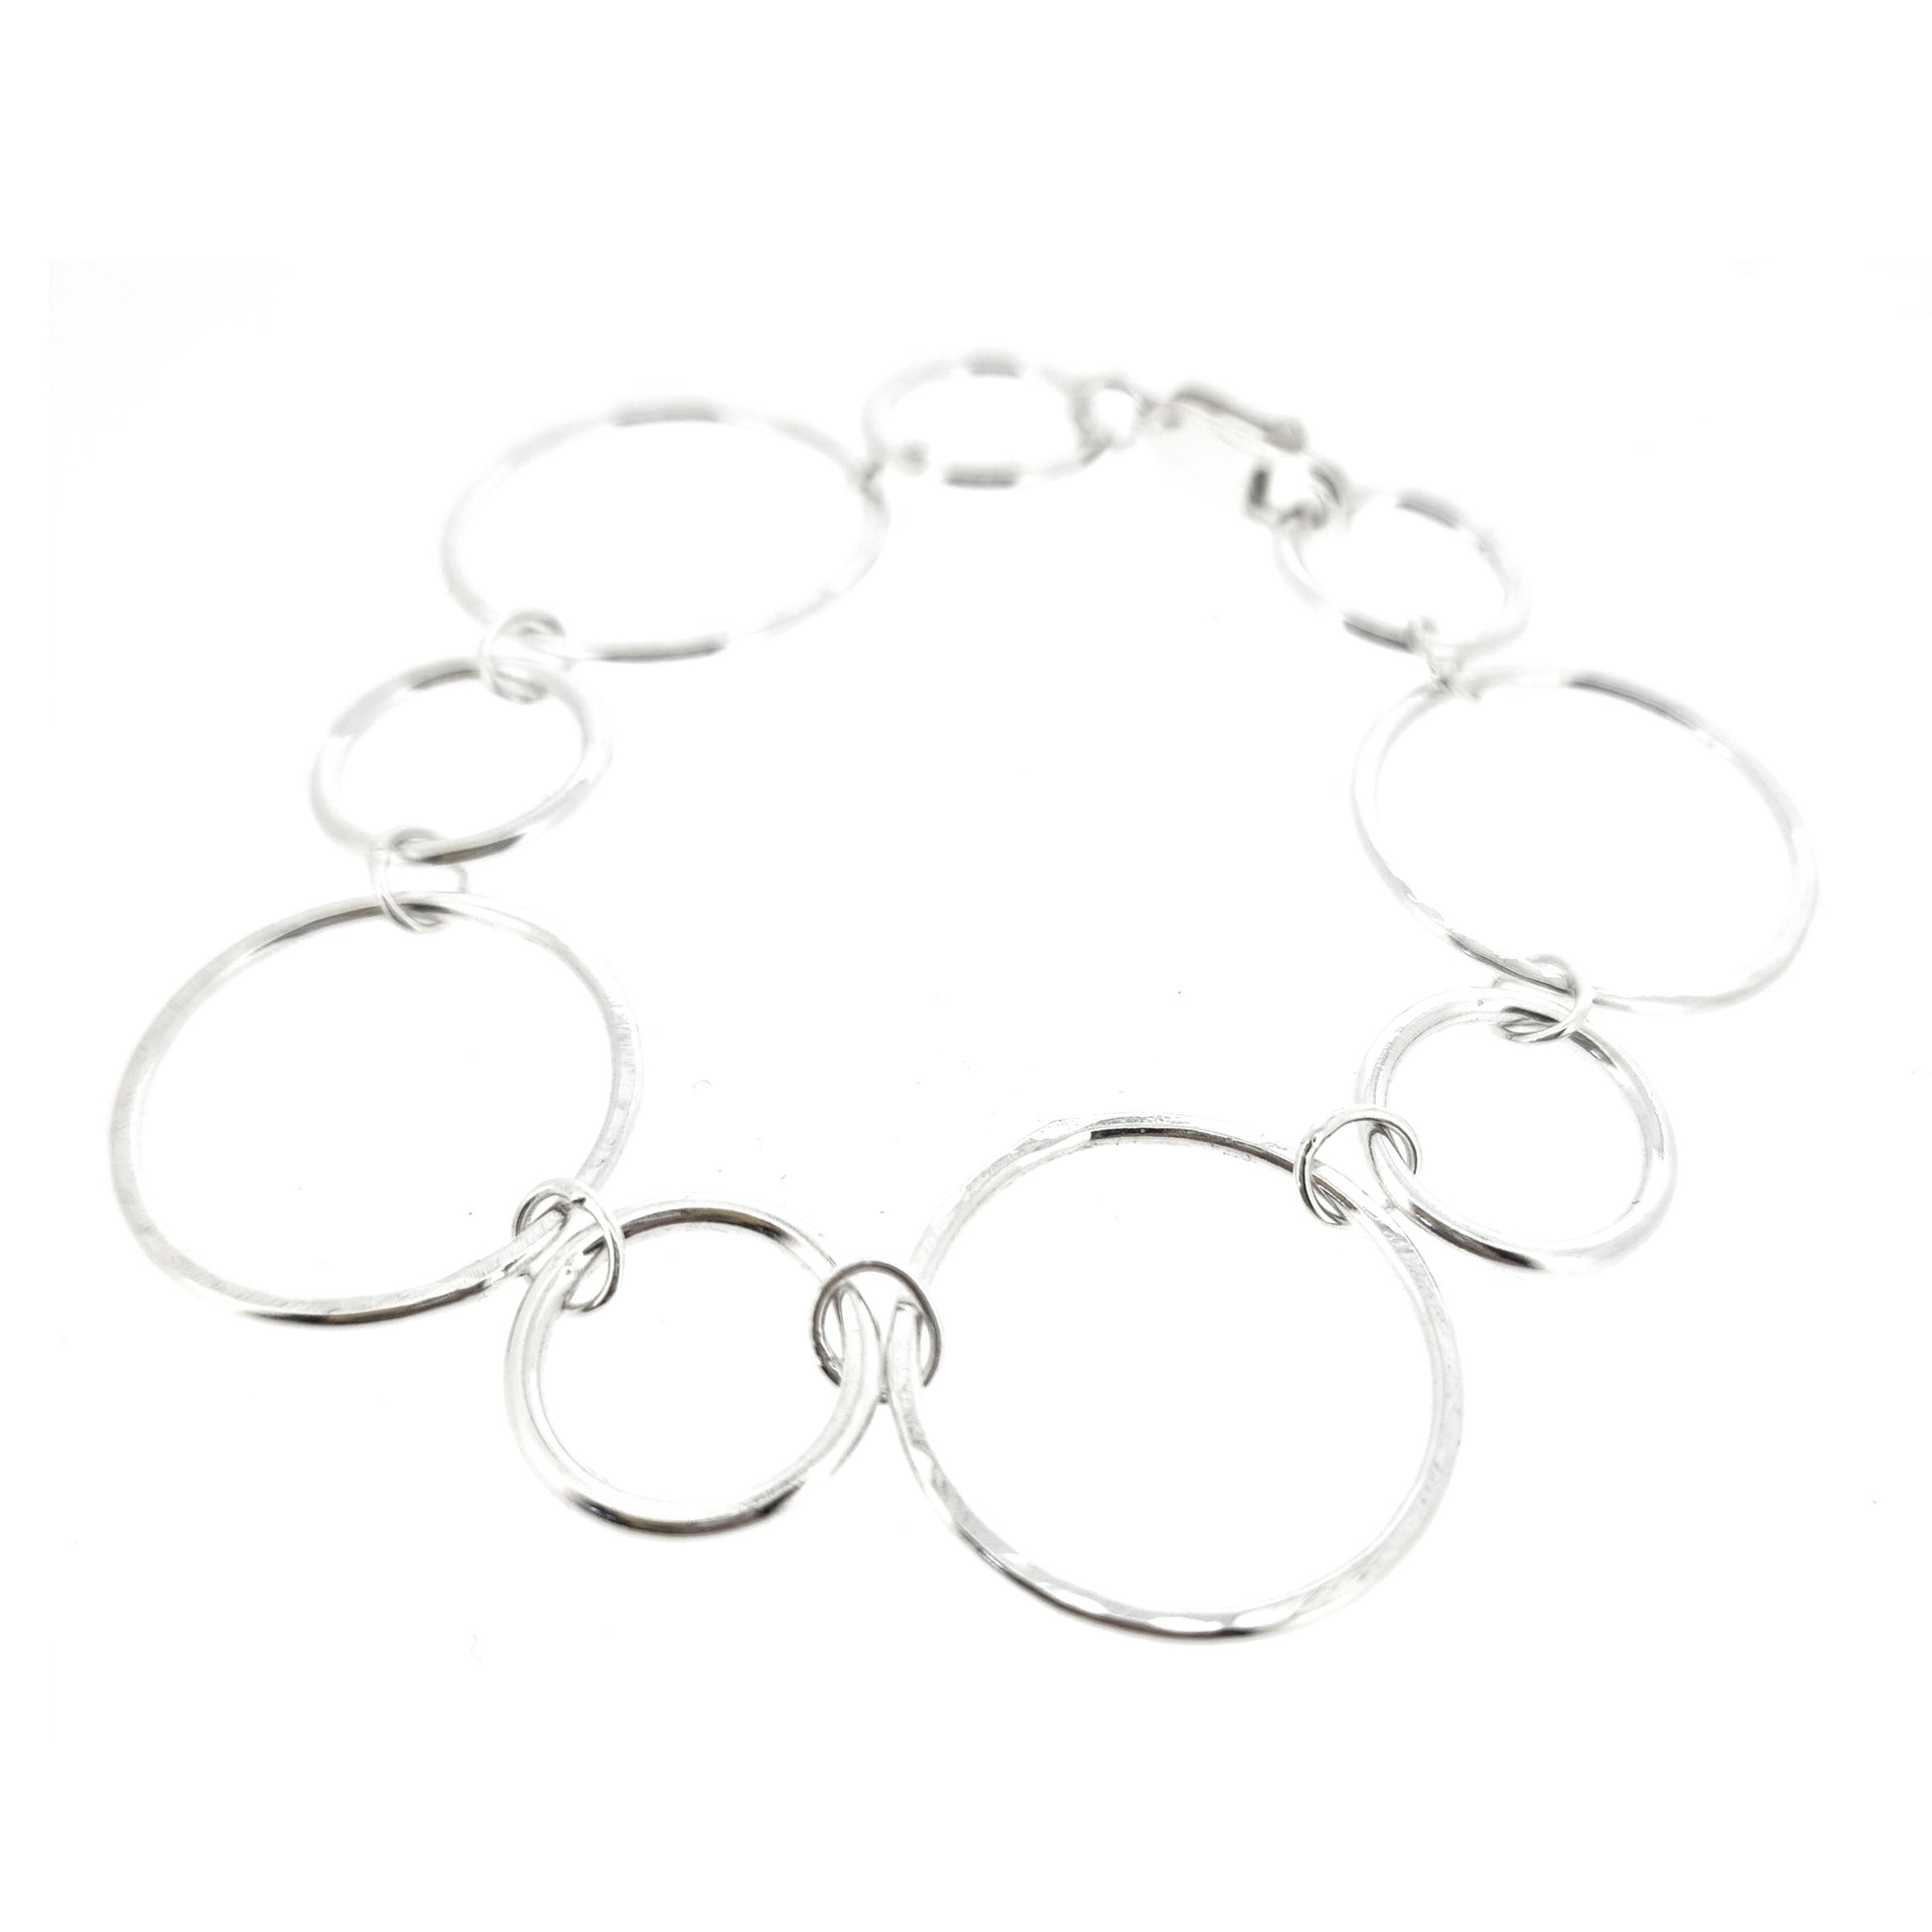 Silver chain link bracelet with 2 sizes of circles, one size has a hammered finish